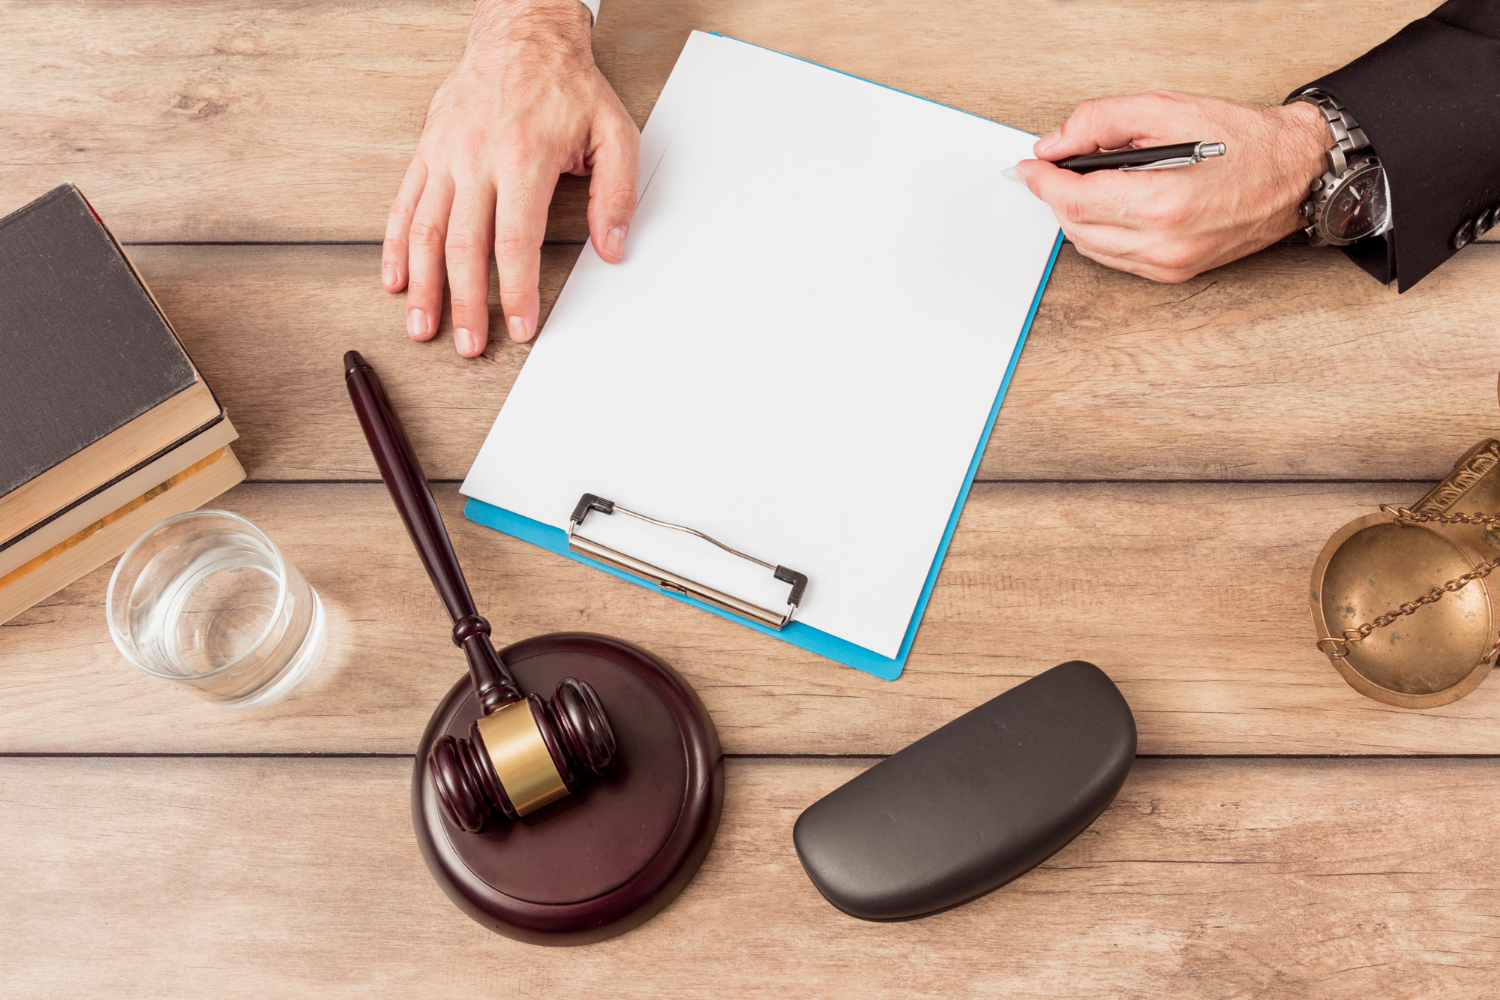 6 Key Legal Choices You Have to Make When Starting Your Business